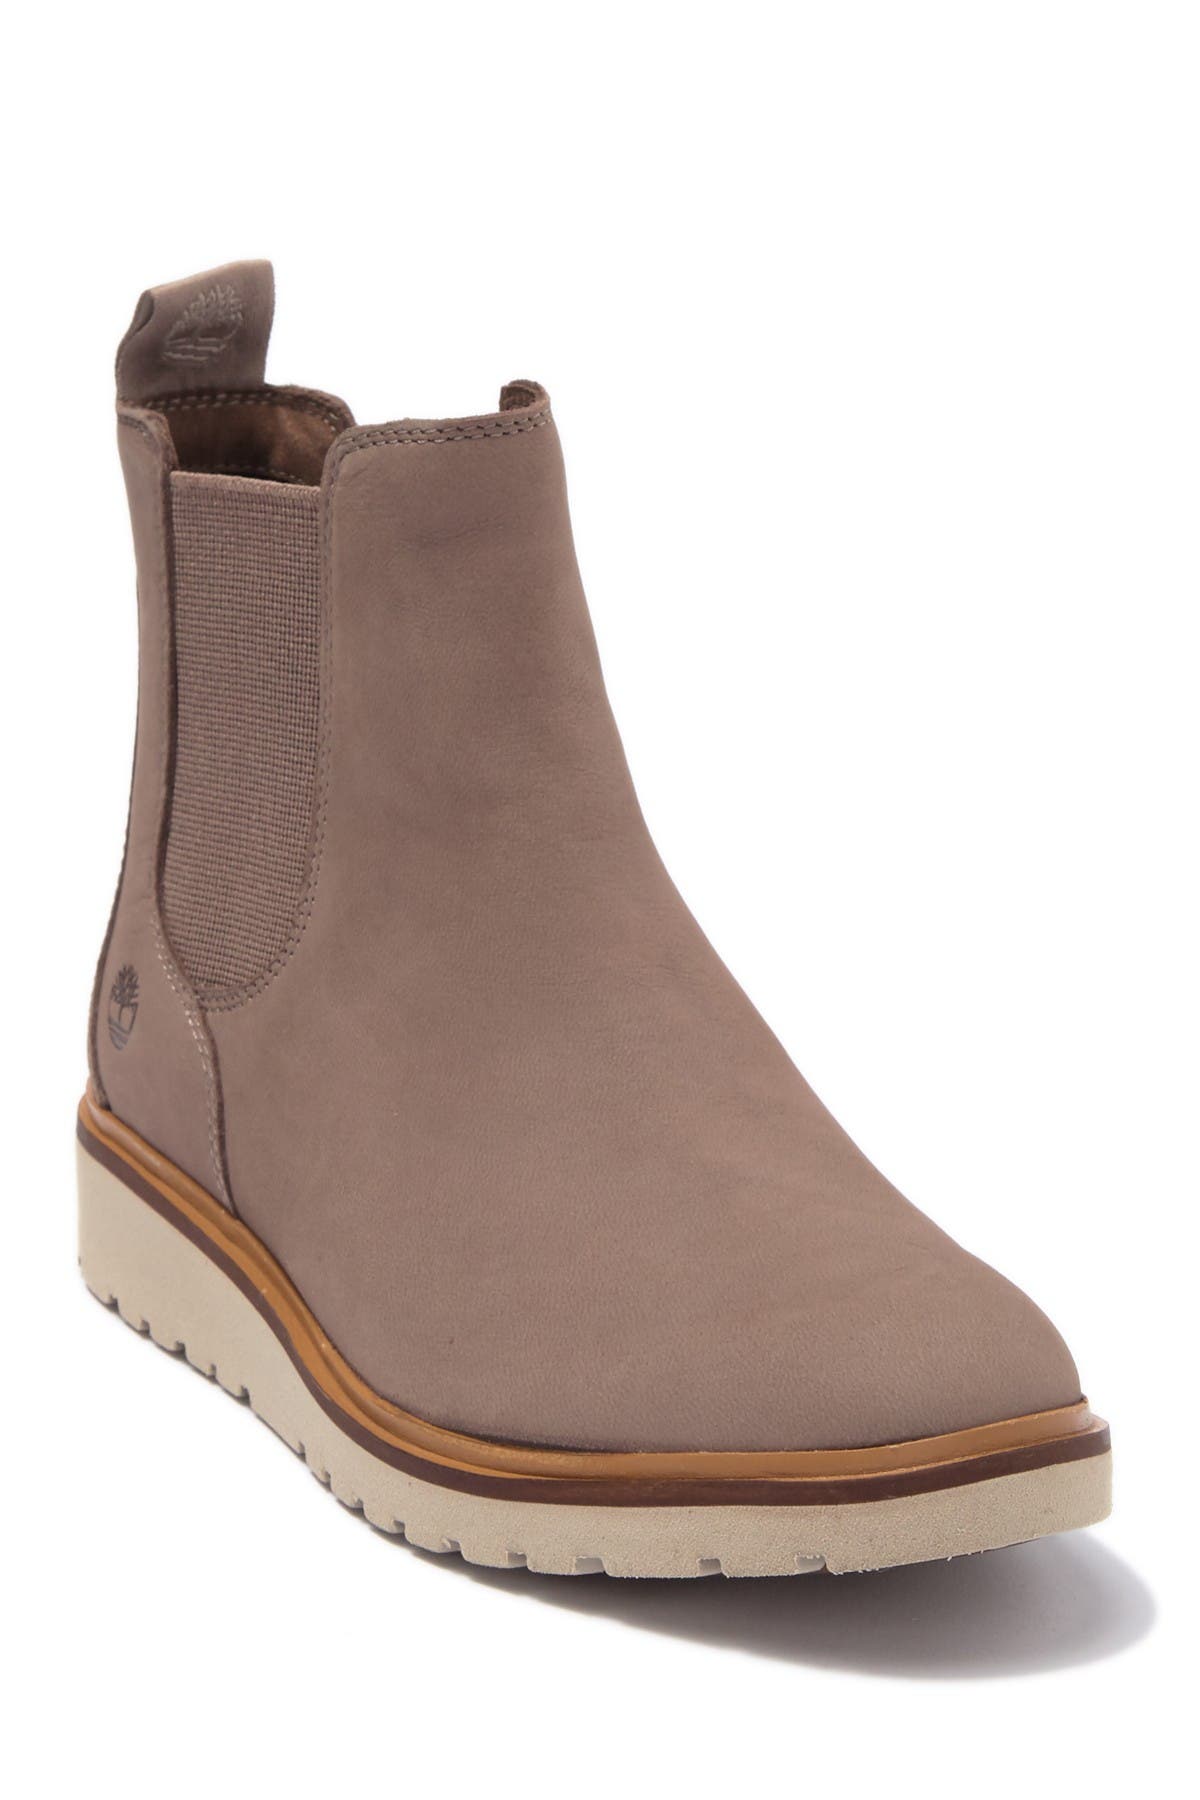 timberland women's ellis street chelsea boots taupe grey